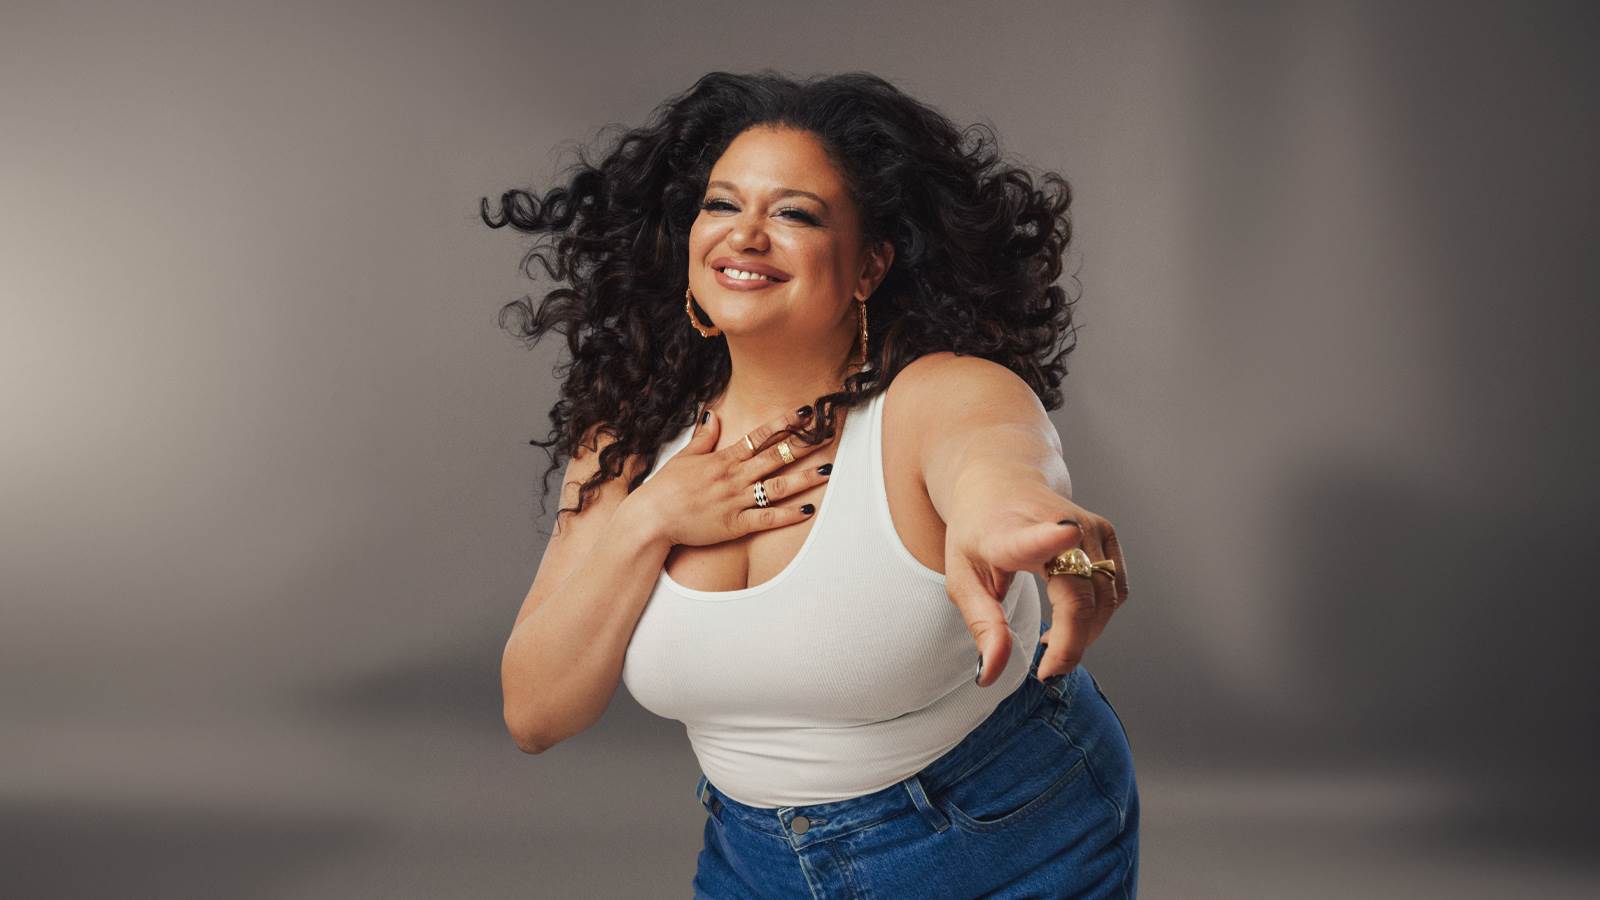 Michelle Buteau Full Heart, Tight Jeans Kennedy Center